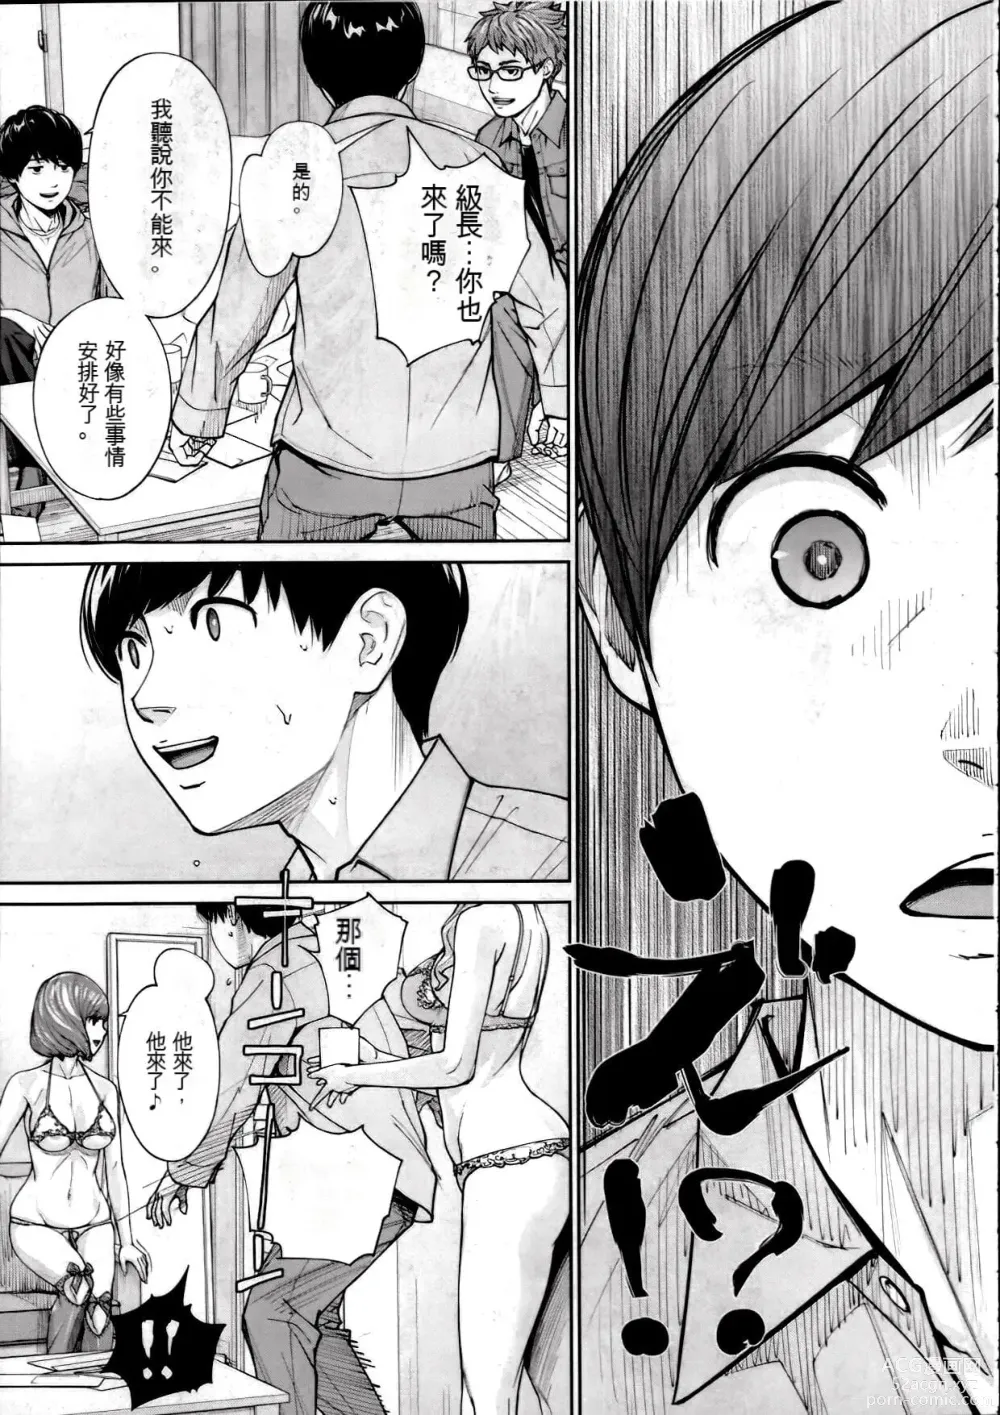 Page 310 of doujinshi 千歳+有罪